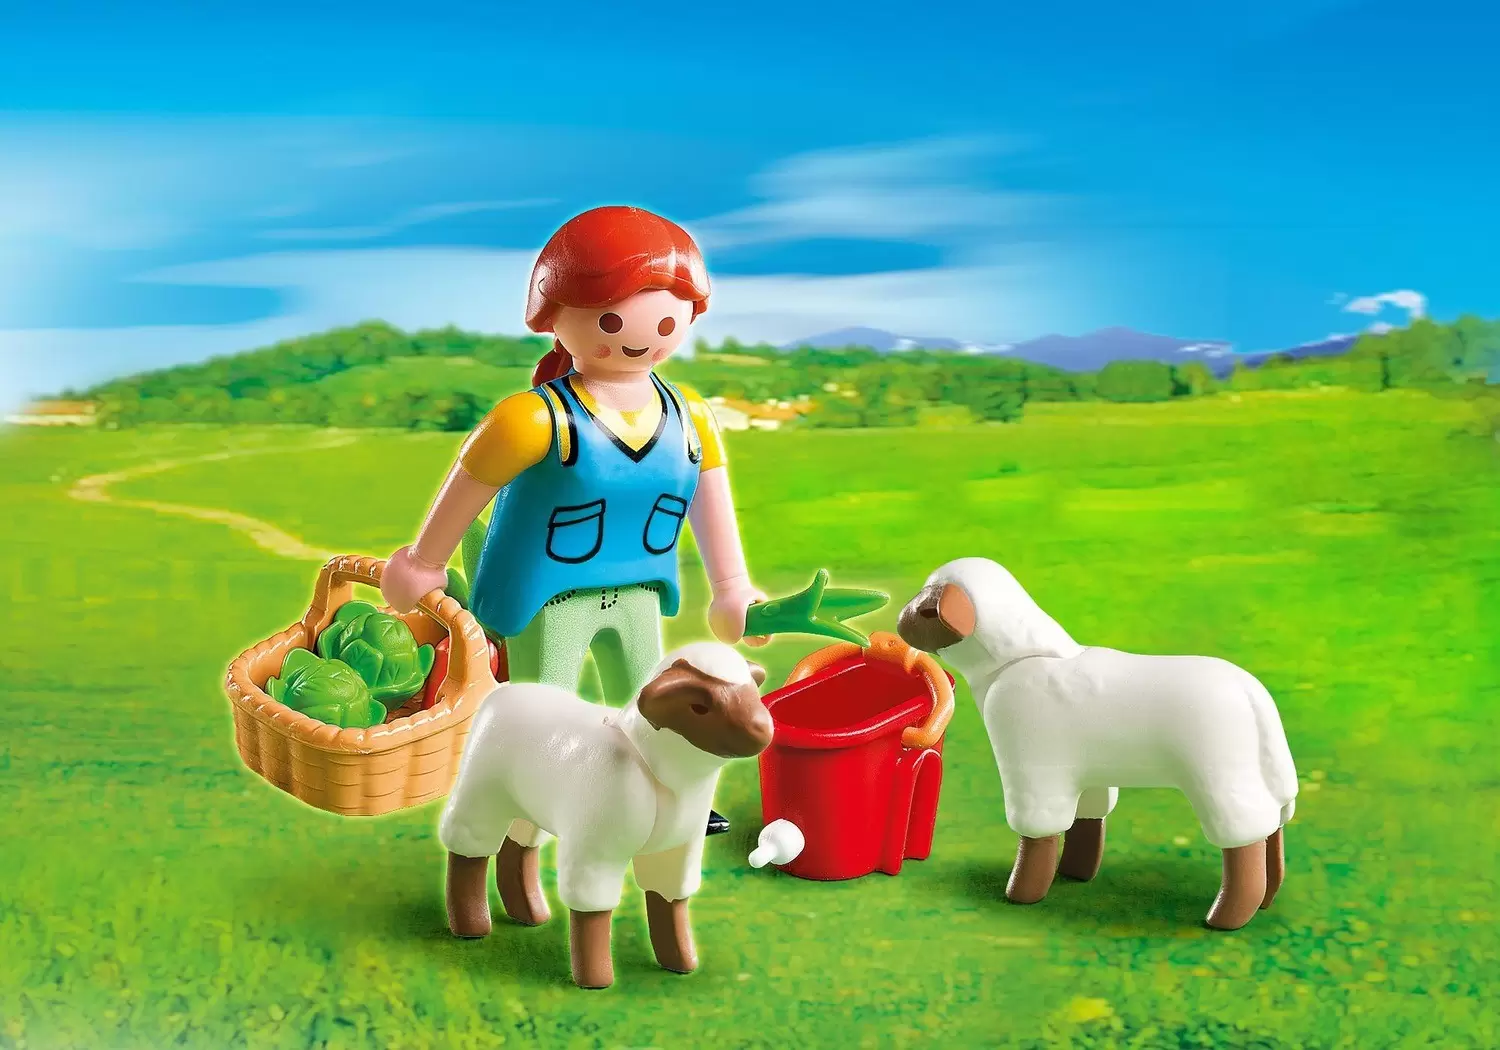 Playmobil SpecialPlus - Agricultrice avec moutons